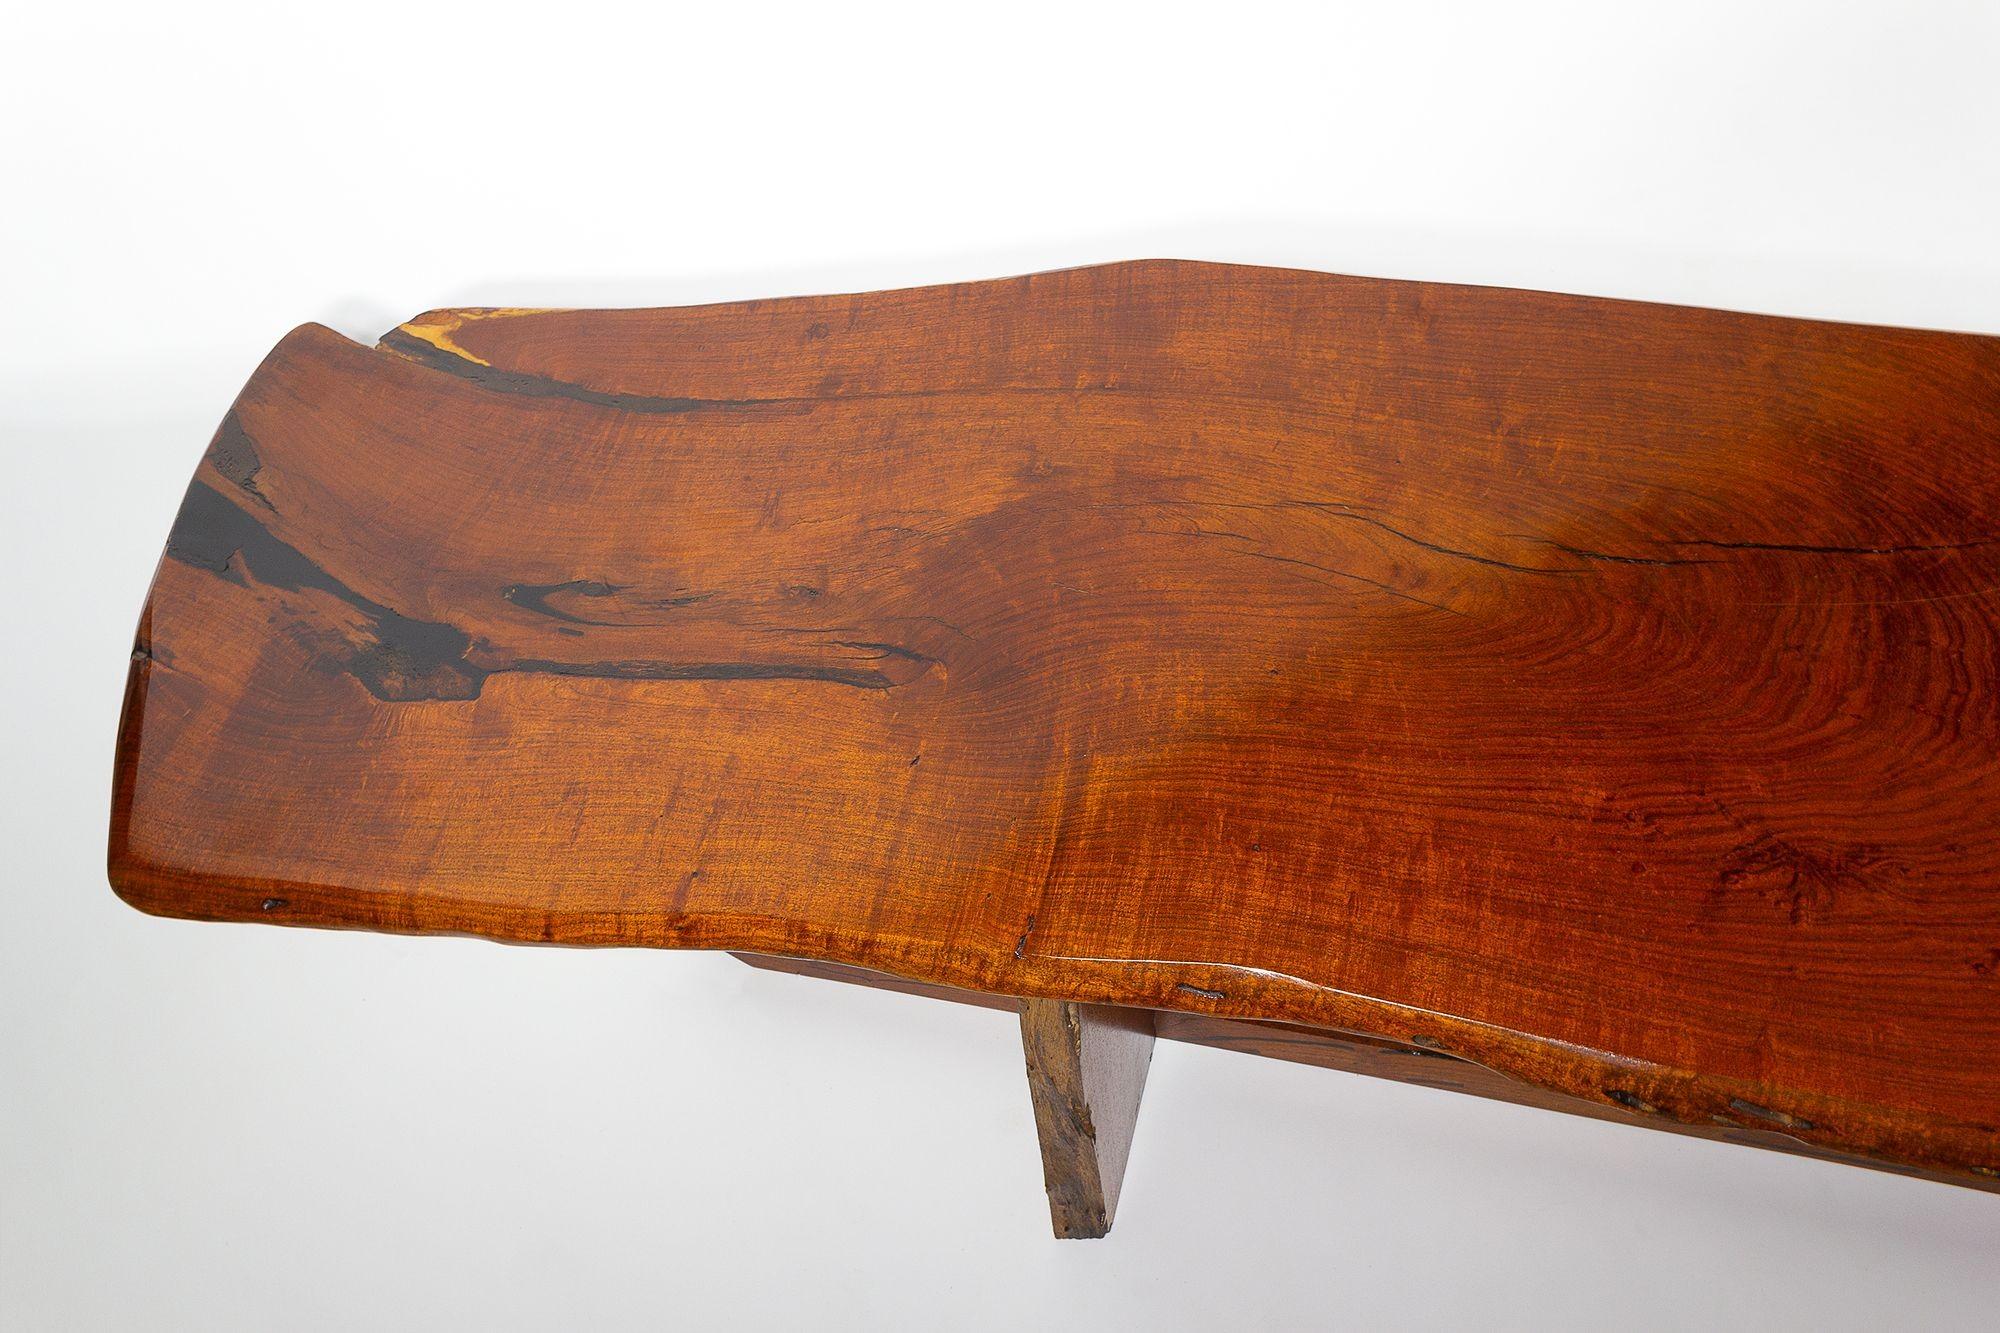 Wood John David Sackett Burled Mesquite Bench After George Nakashima Butterfly Joint For Sale